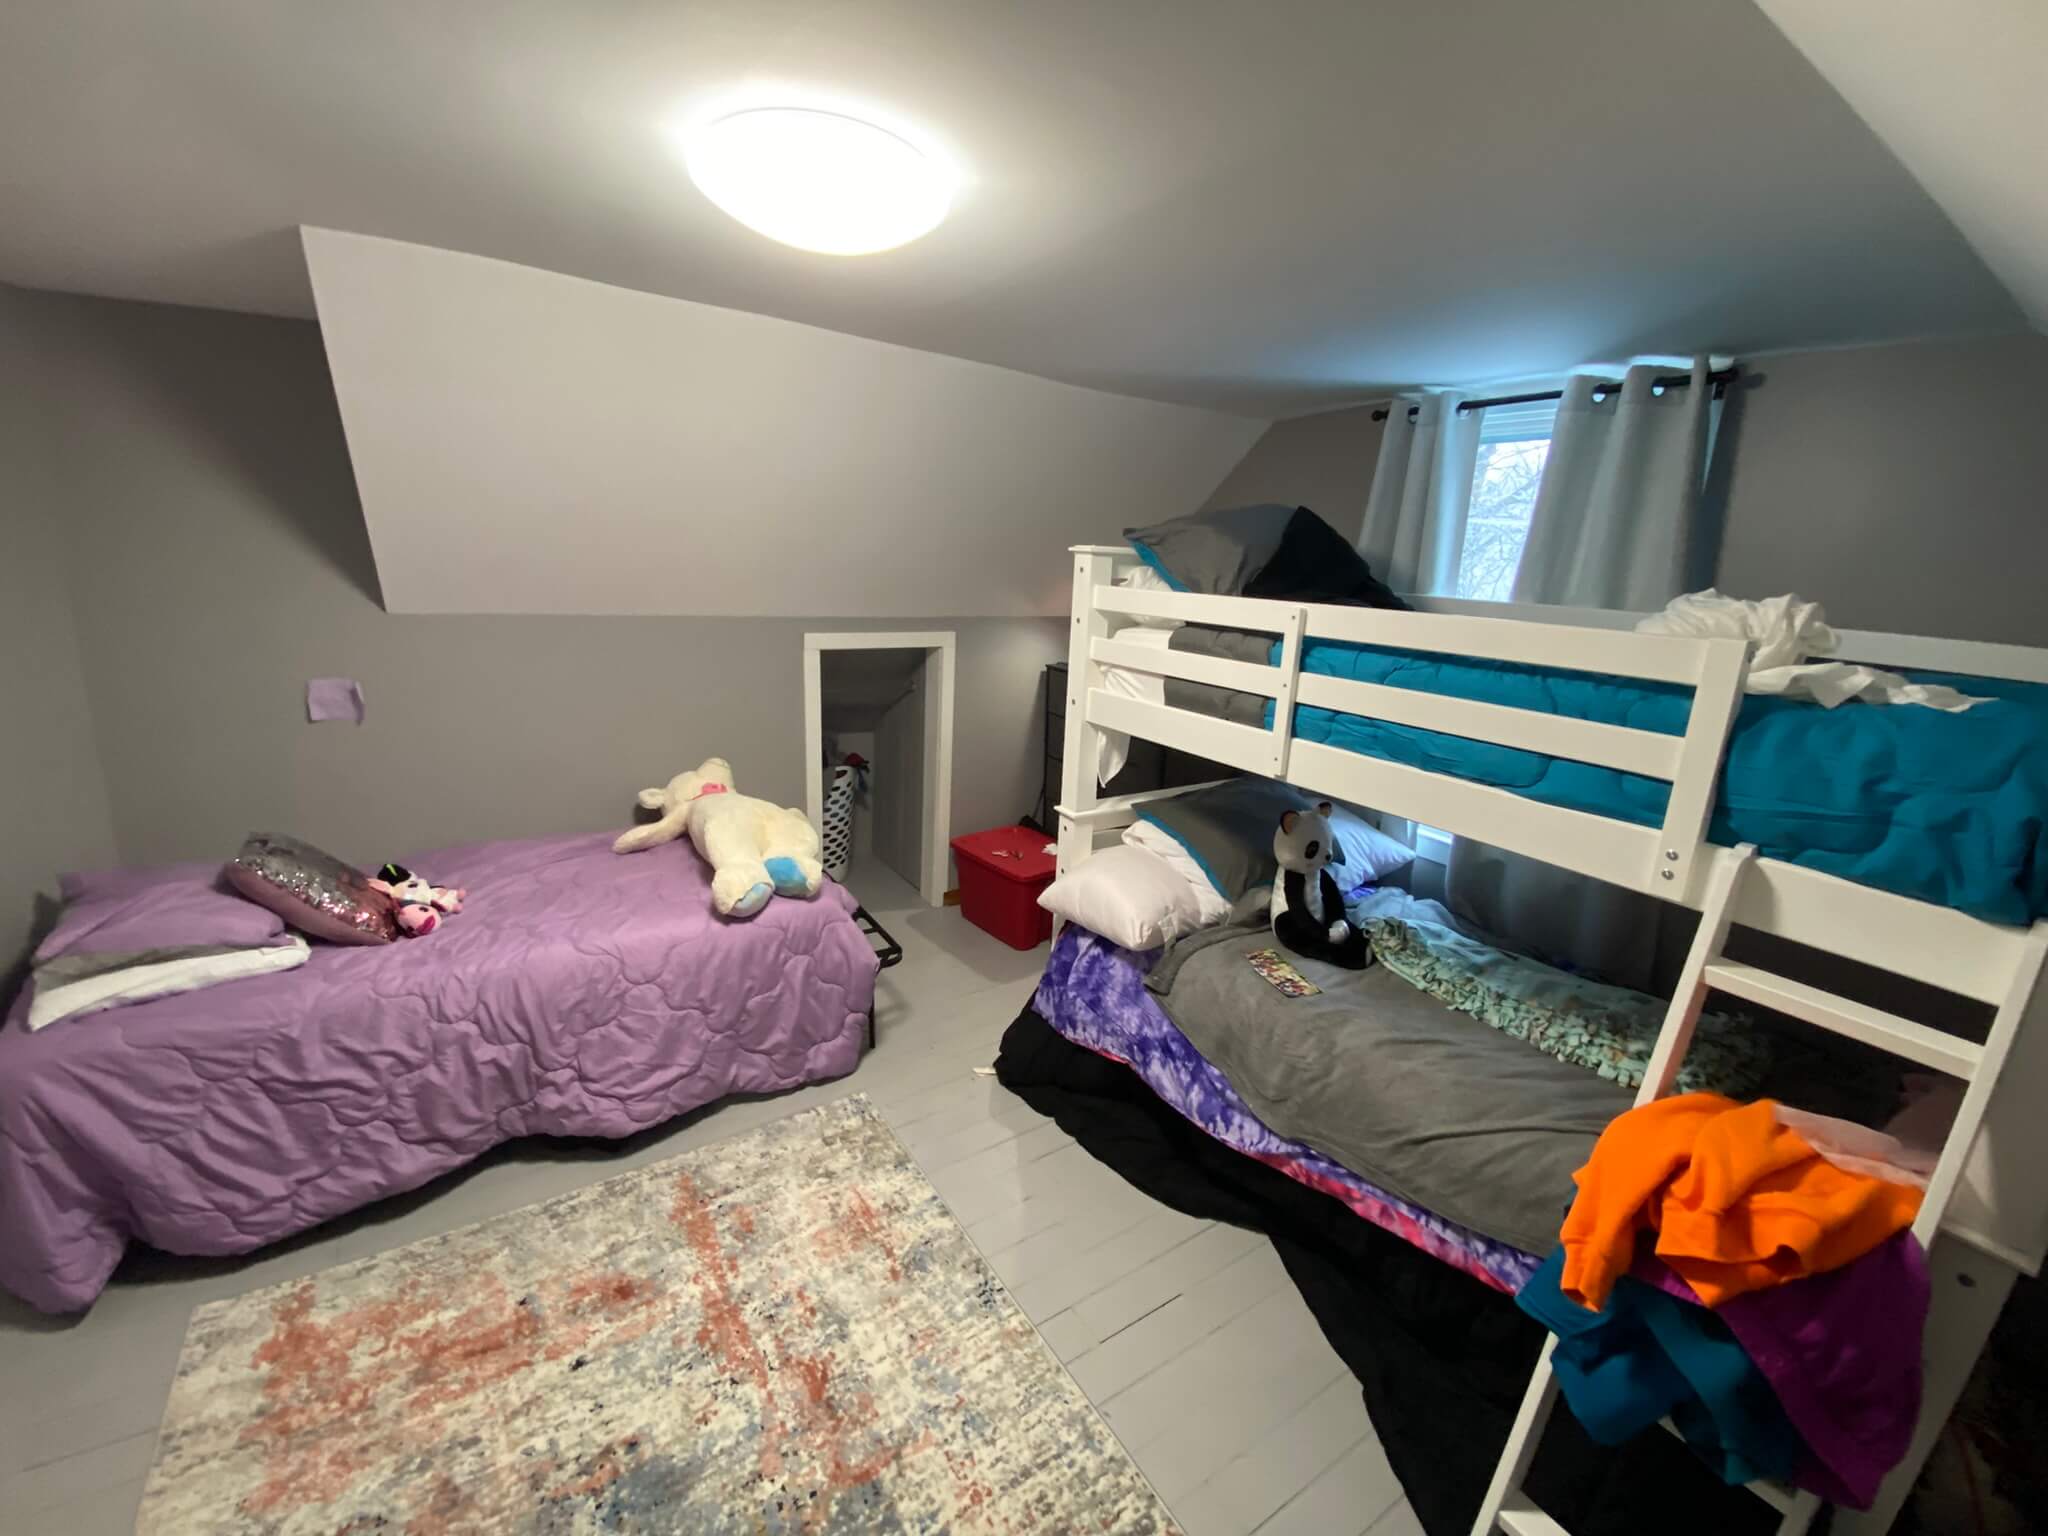 A bedroom with a bunk bed and a third bed next to it